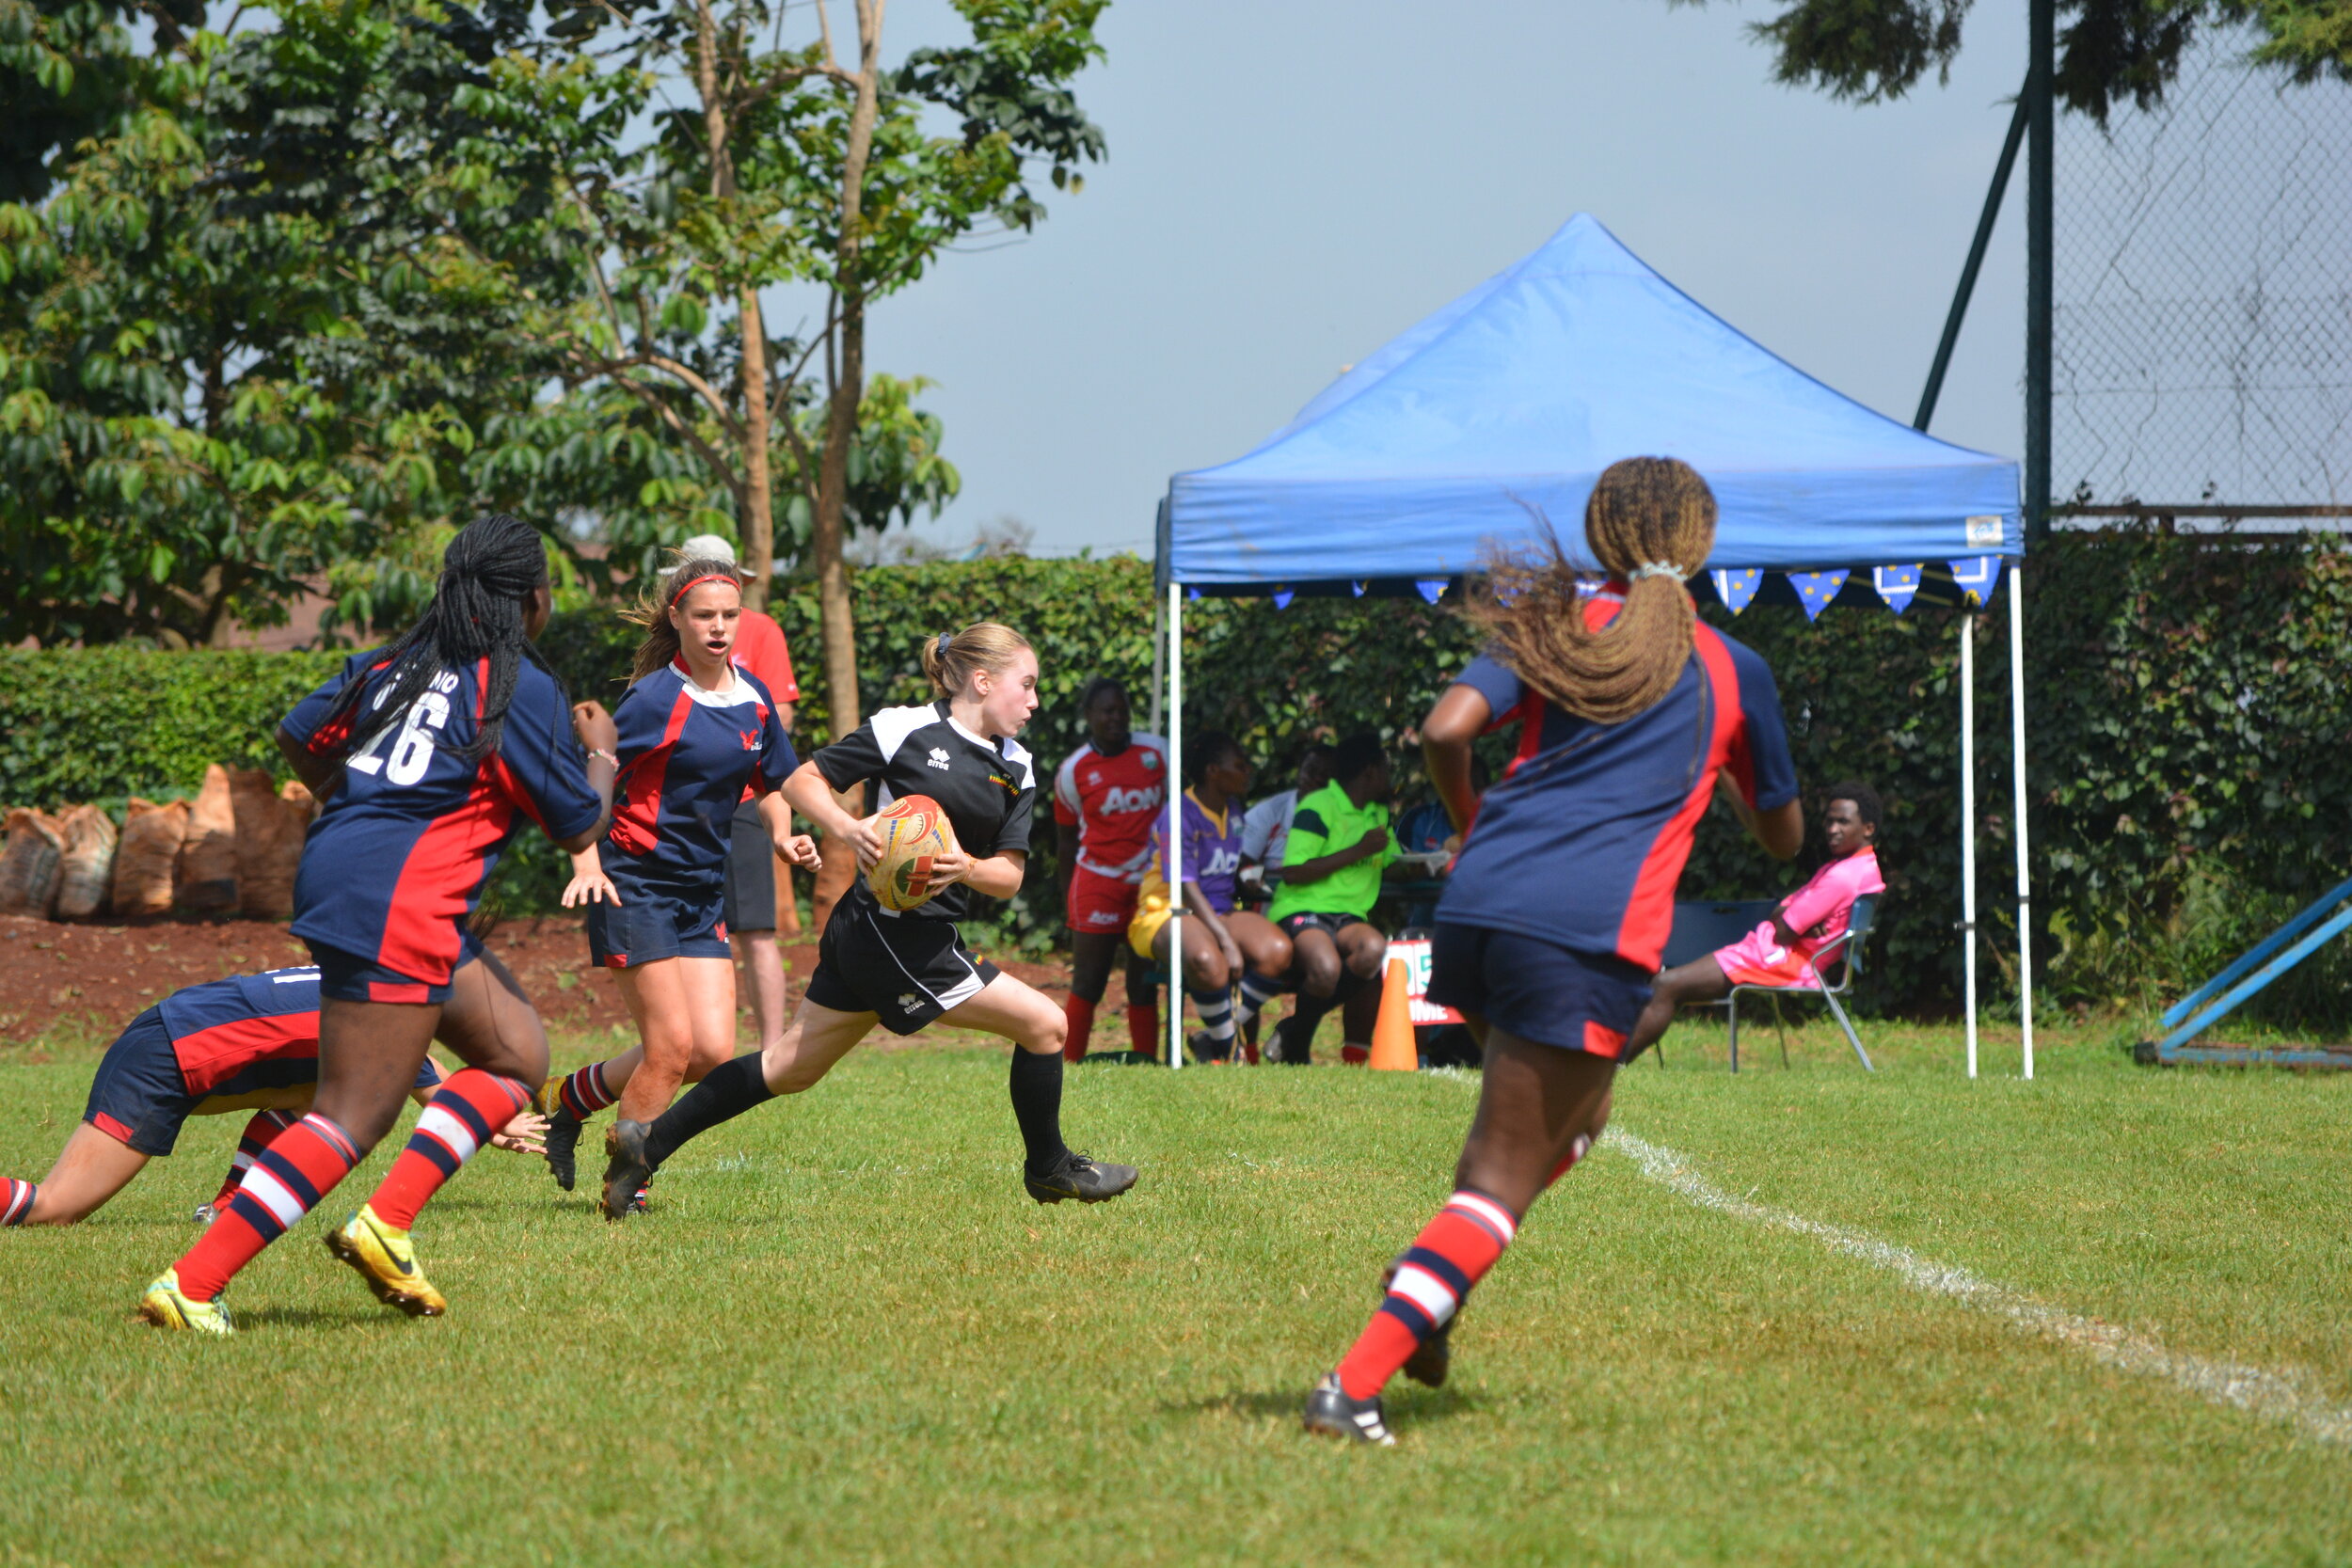 Rugby action shot #1.jpg